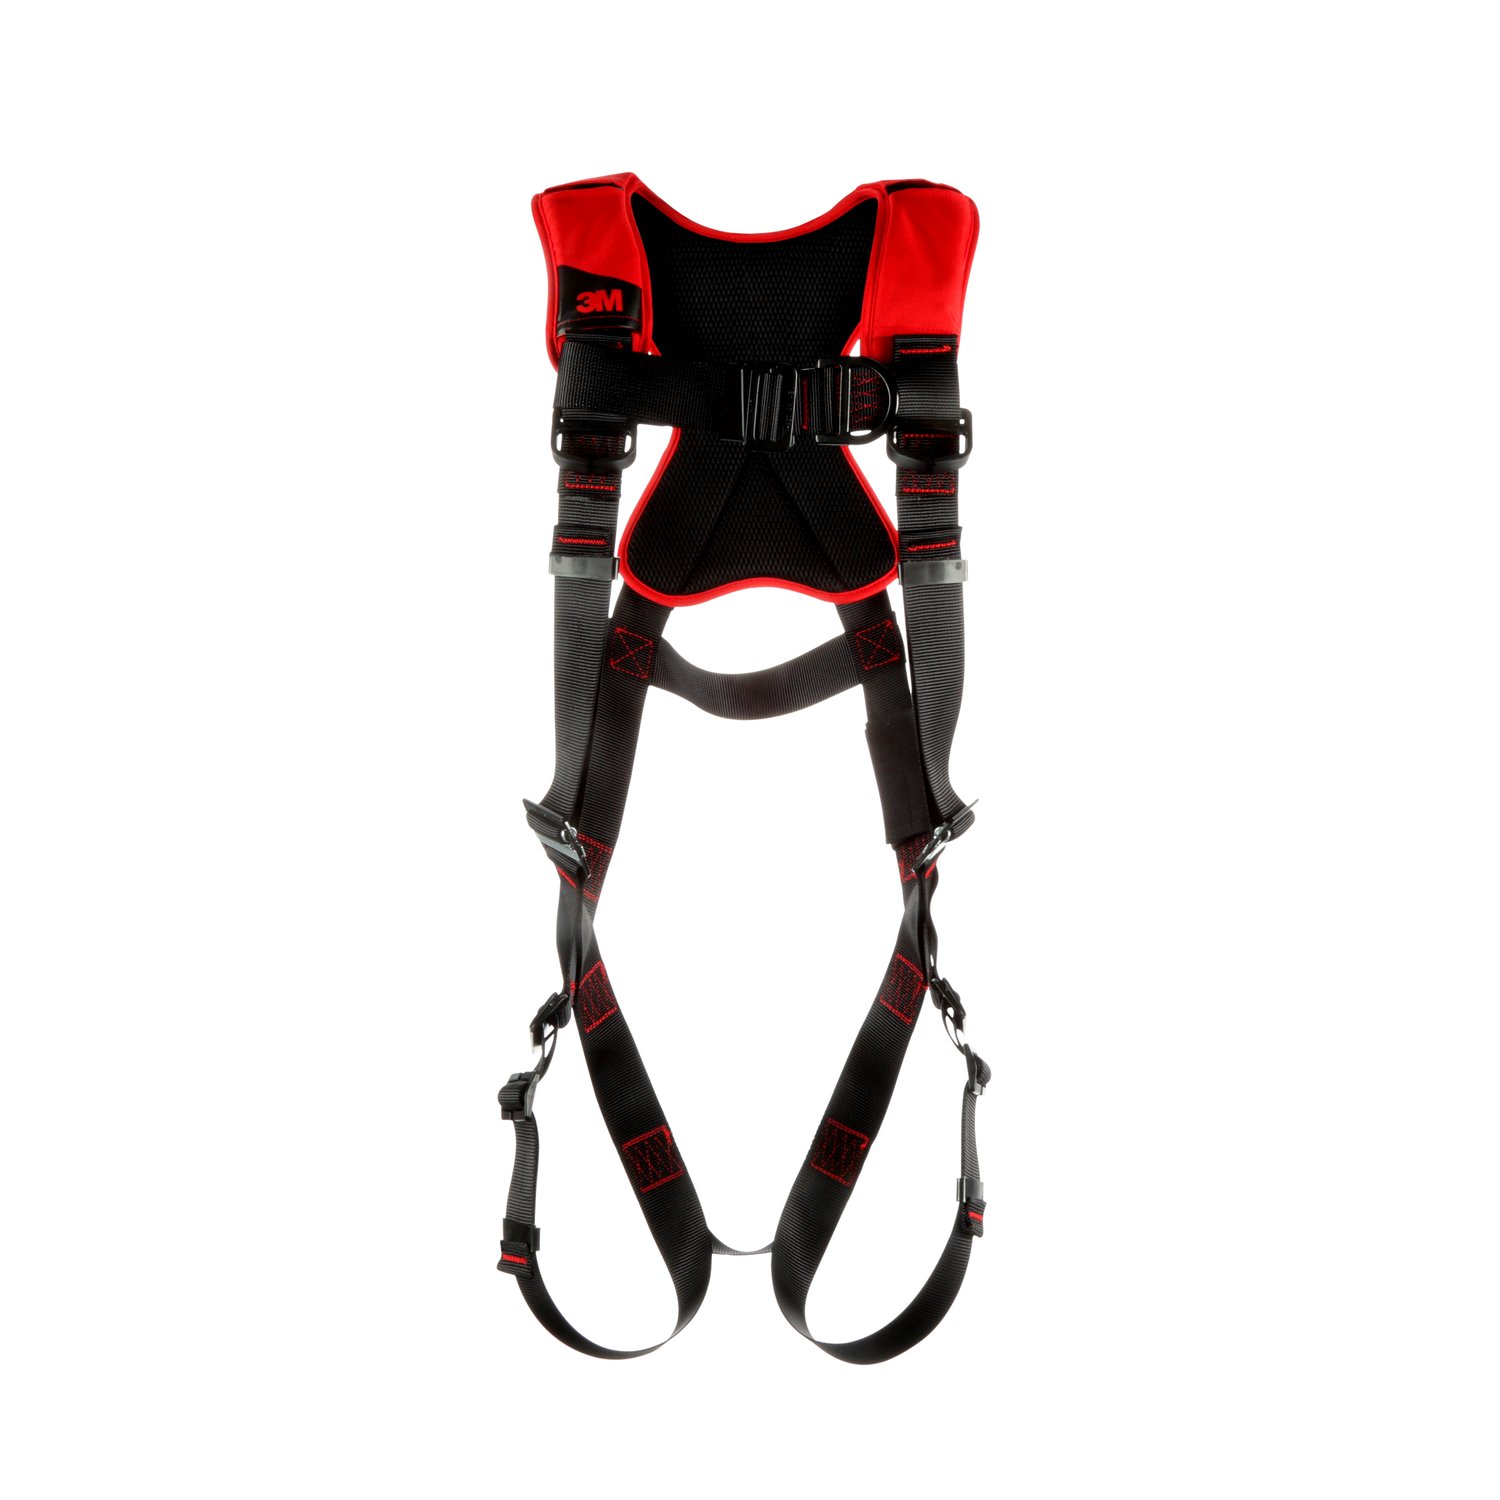 7012816713 - 3M Protecta P200 Comfort Vest Climbing Safety Harness 1161433, Small